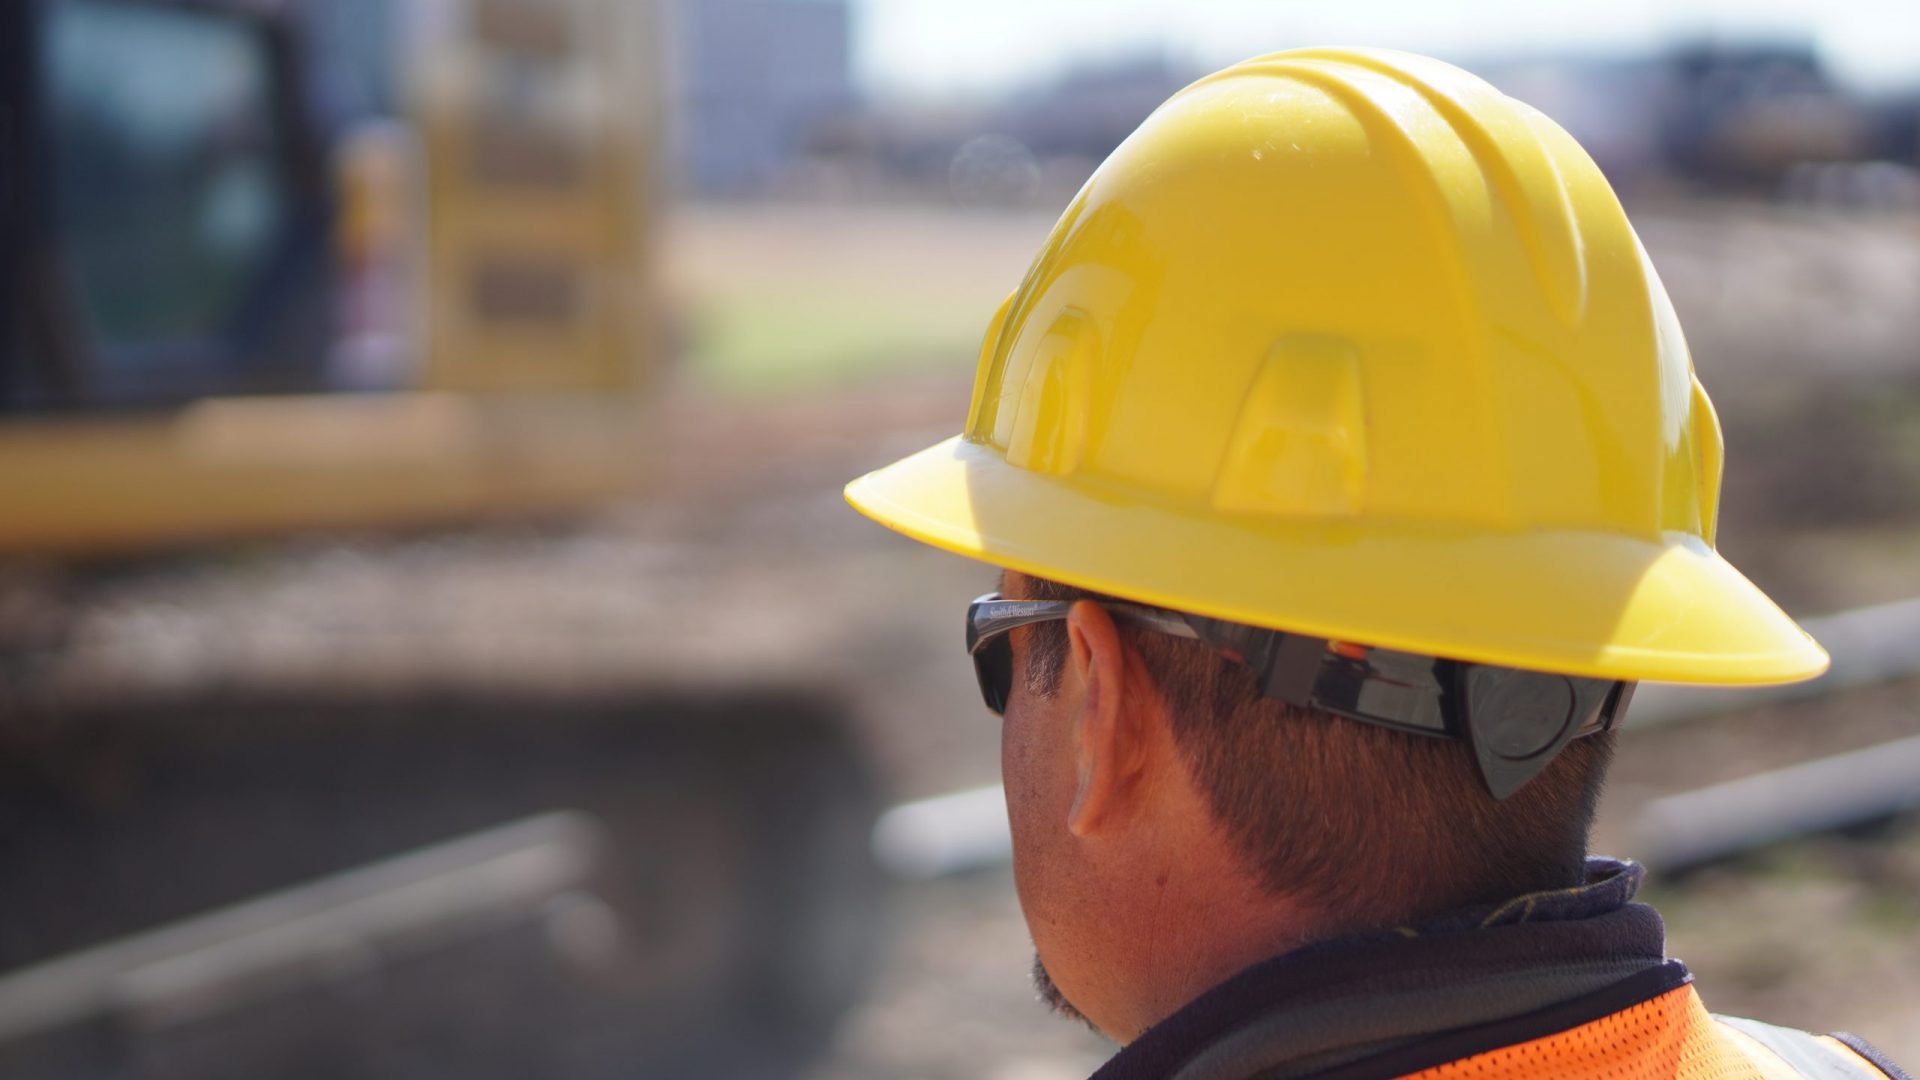 A railroad maintenance worker in a yellow hardhat observes a worksite.